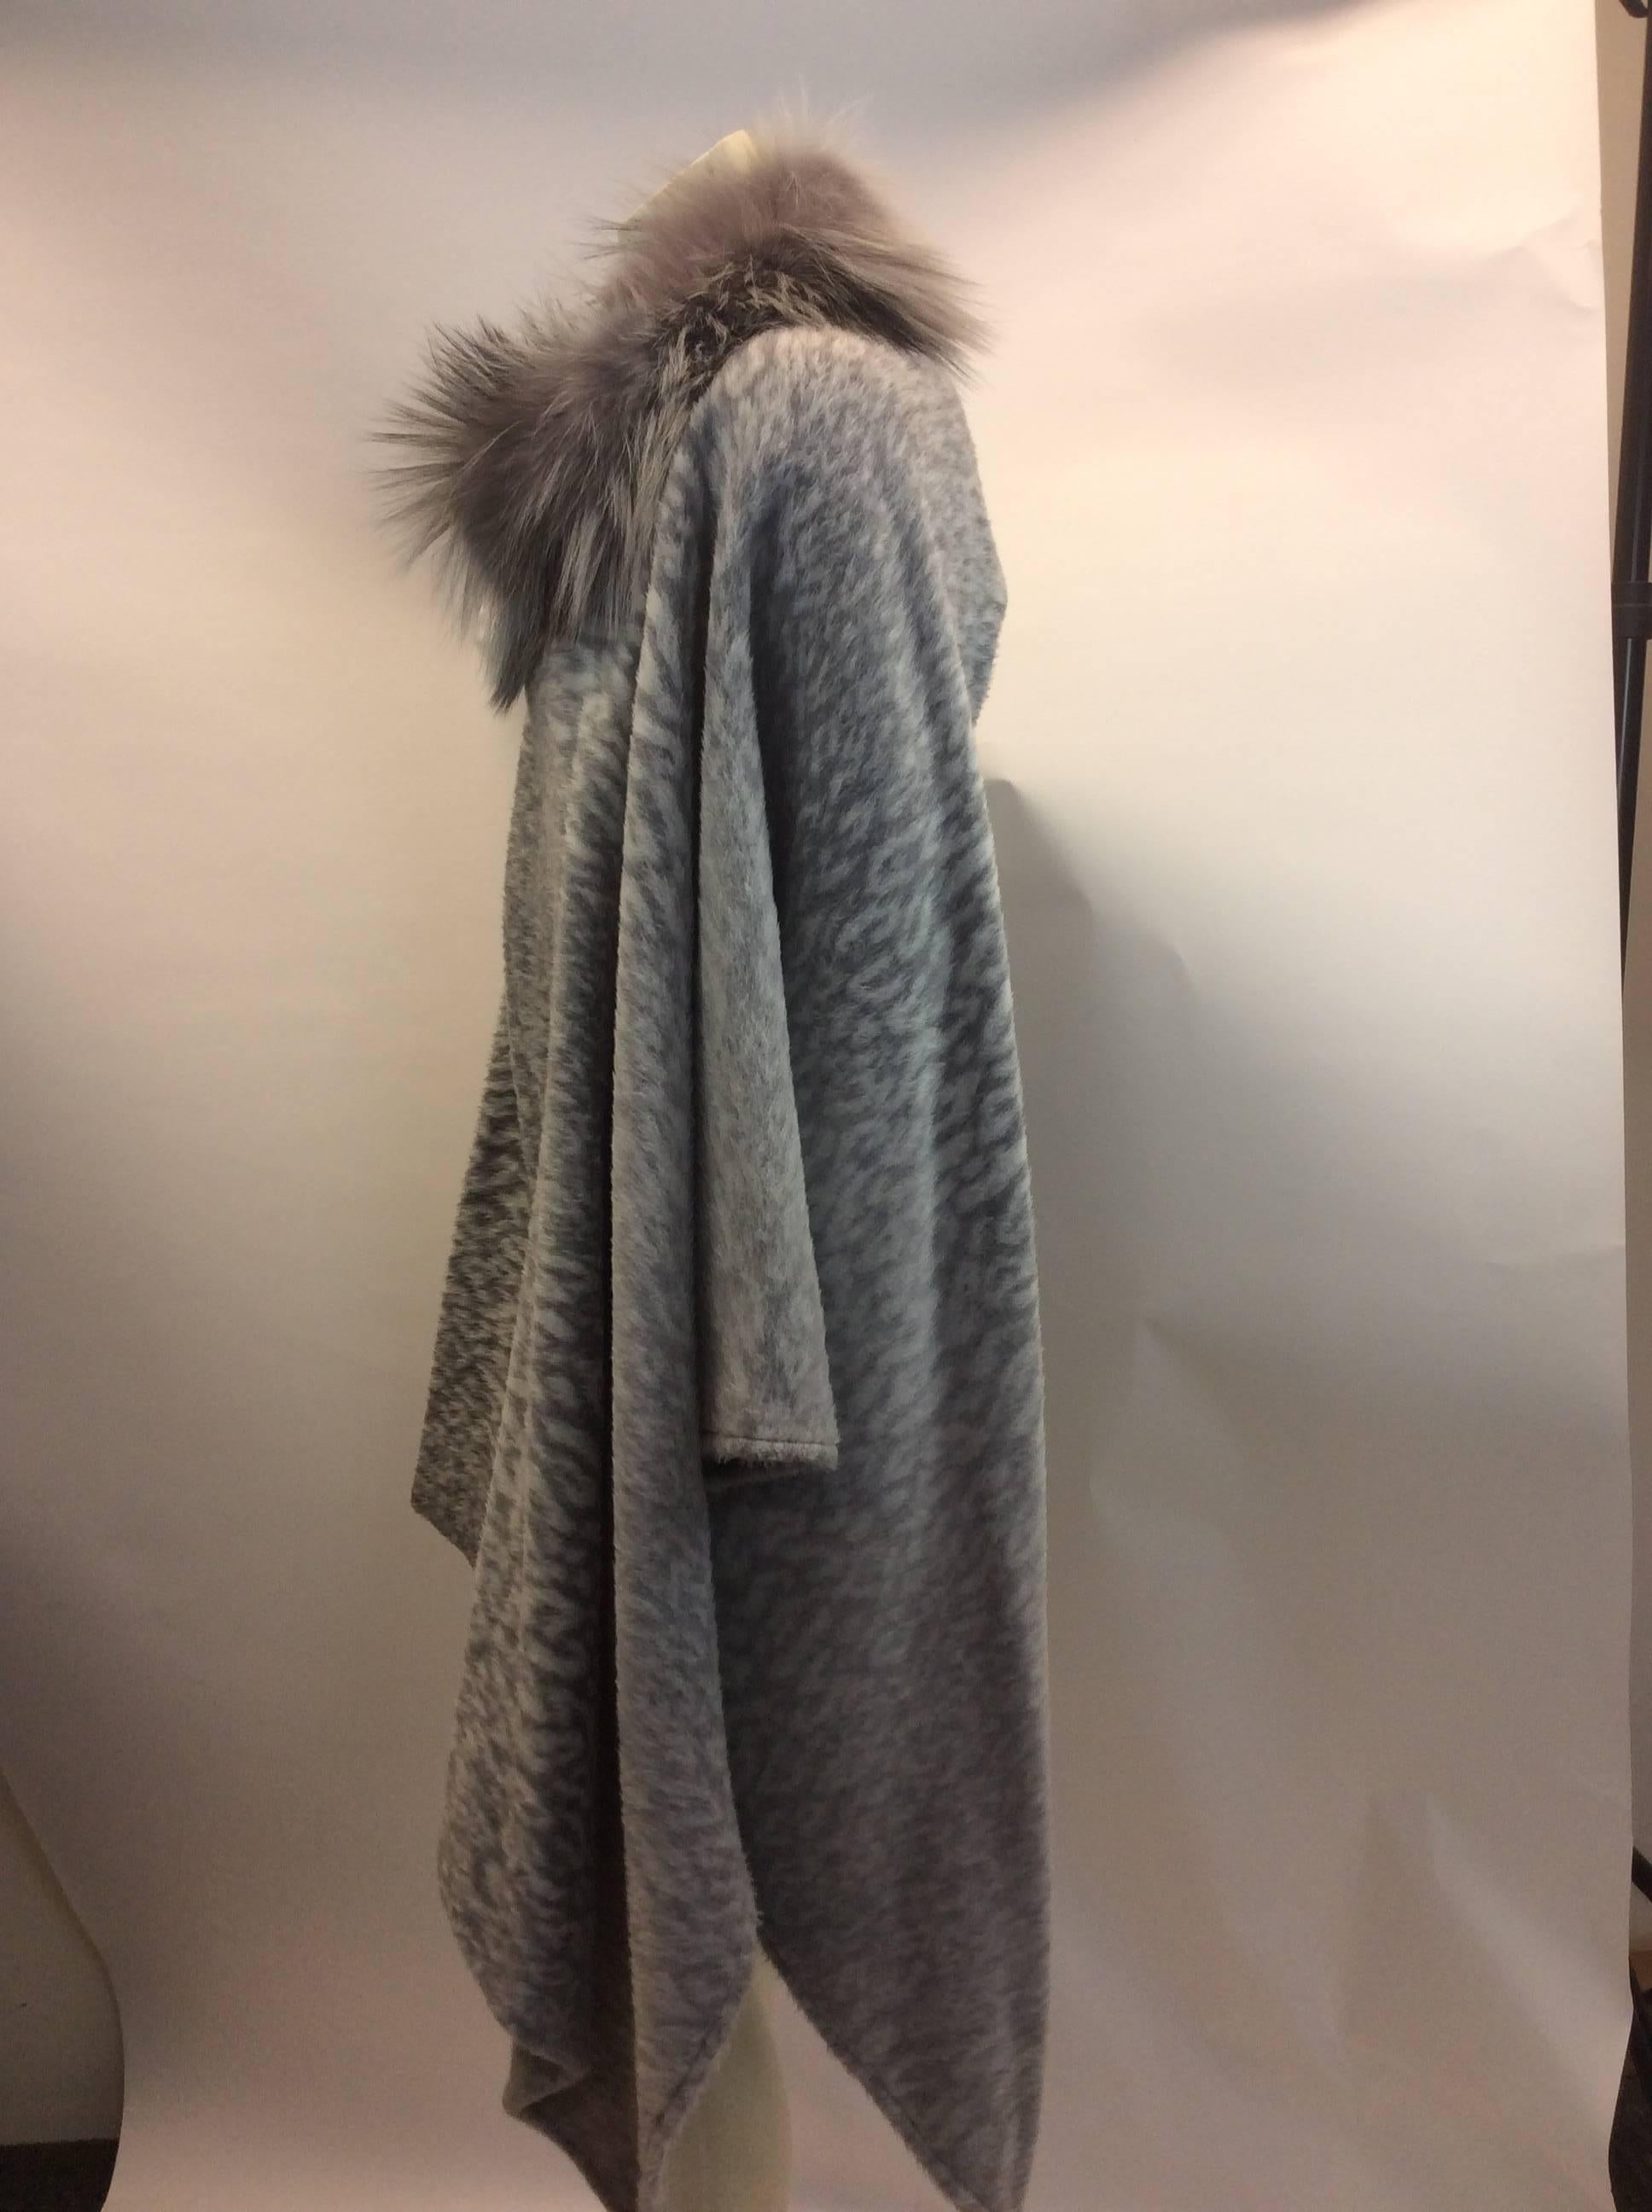 Mazzi Gray Leopard Fox Trimmed Cape In Excellent Condition For Sale In Narberth, PA